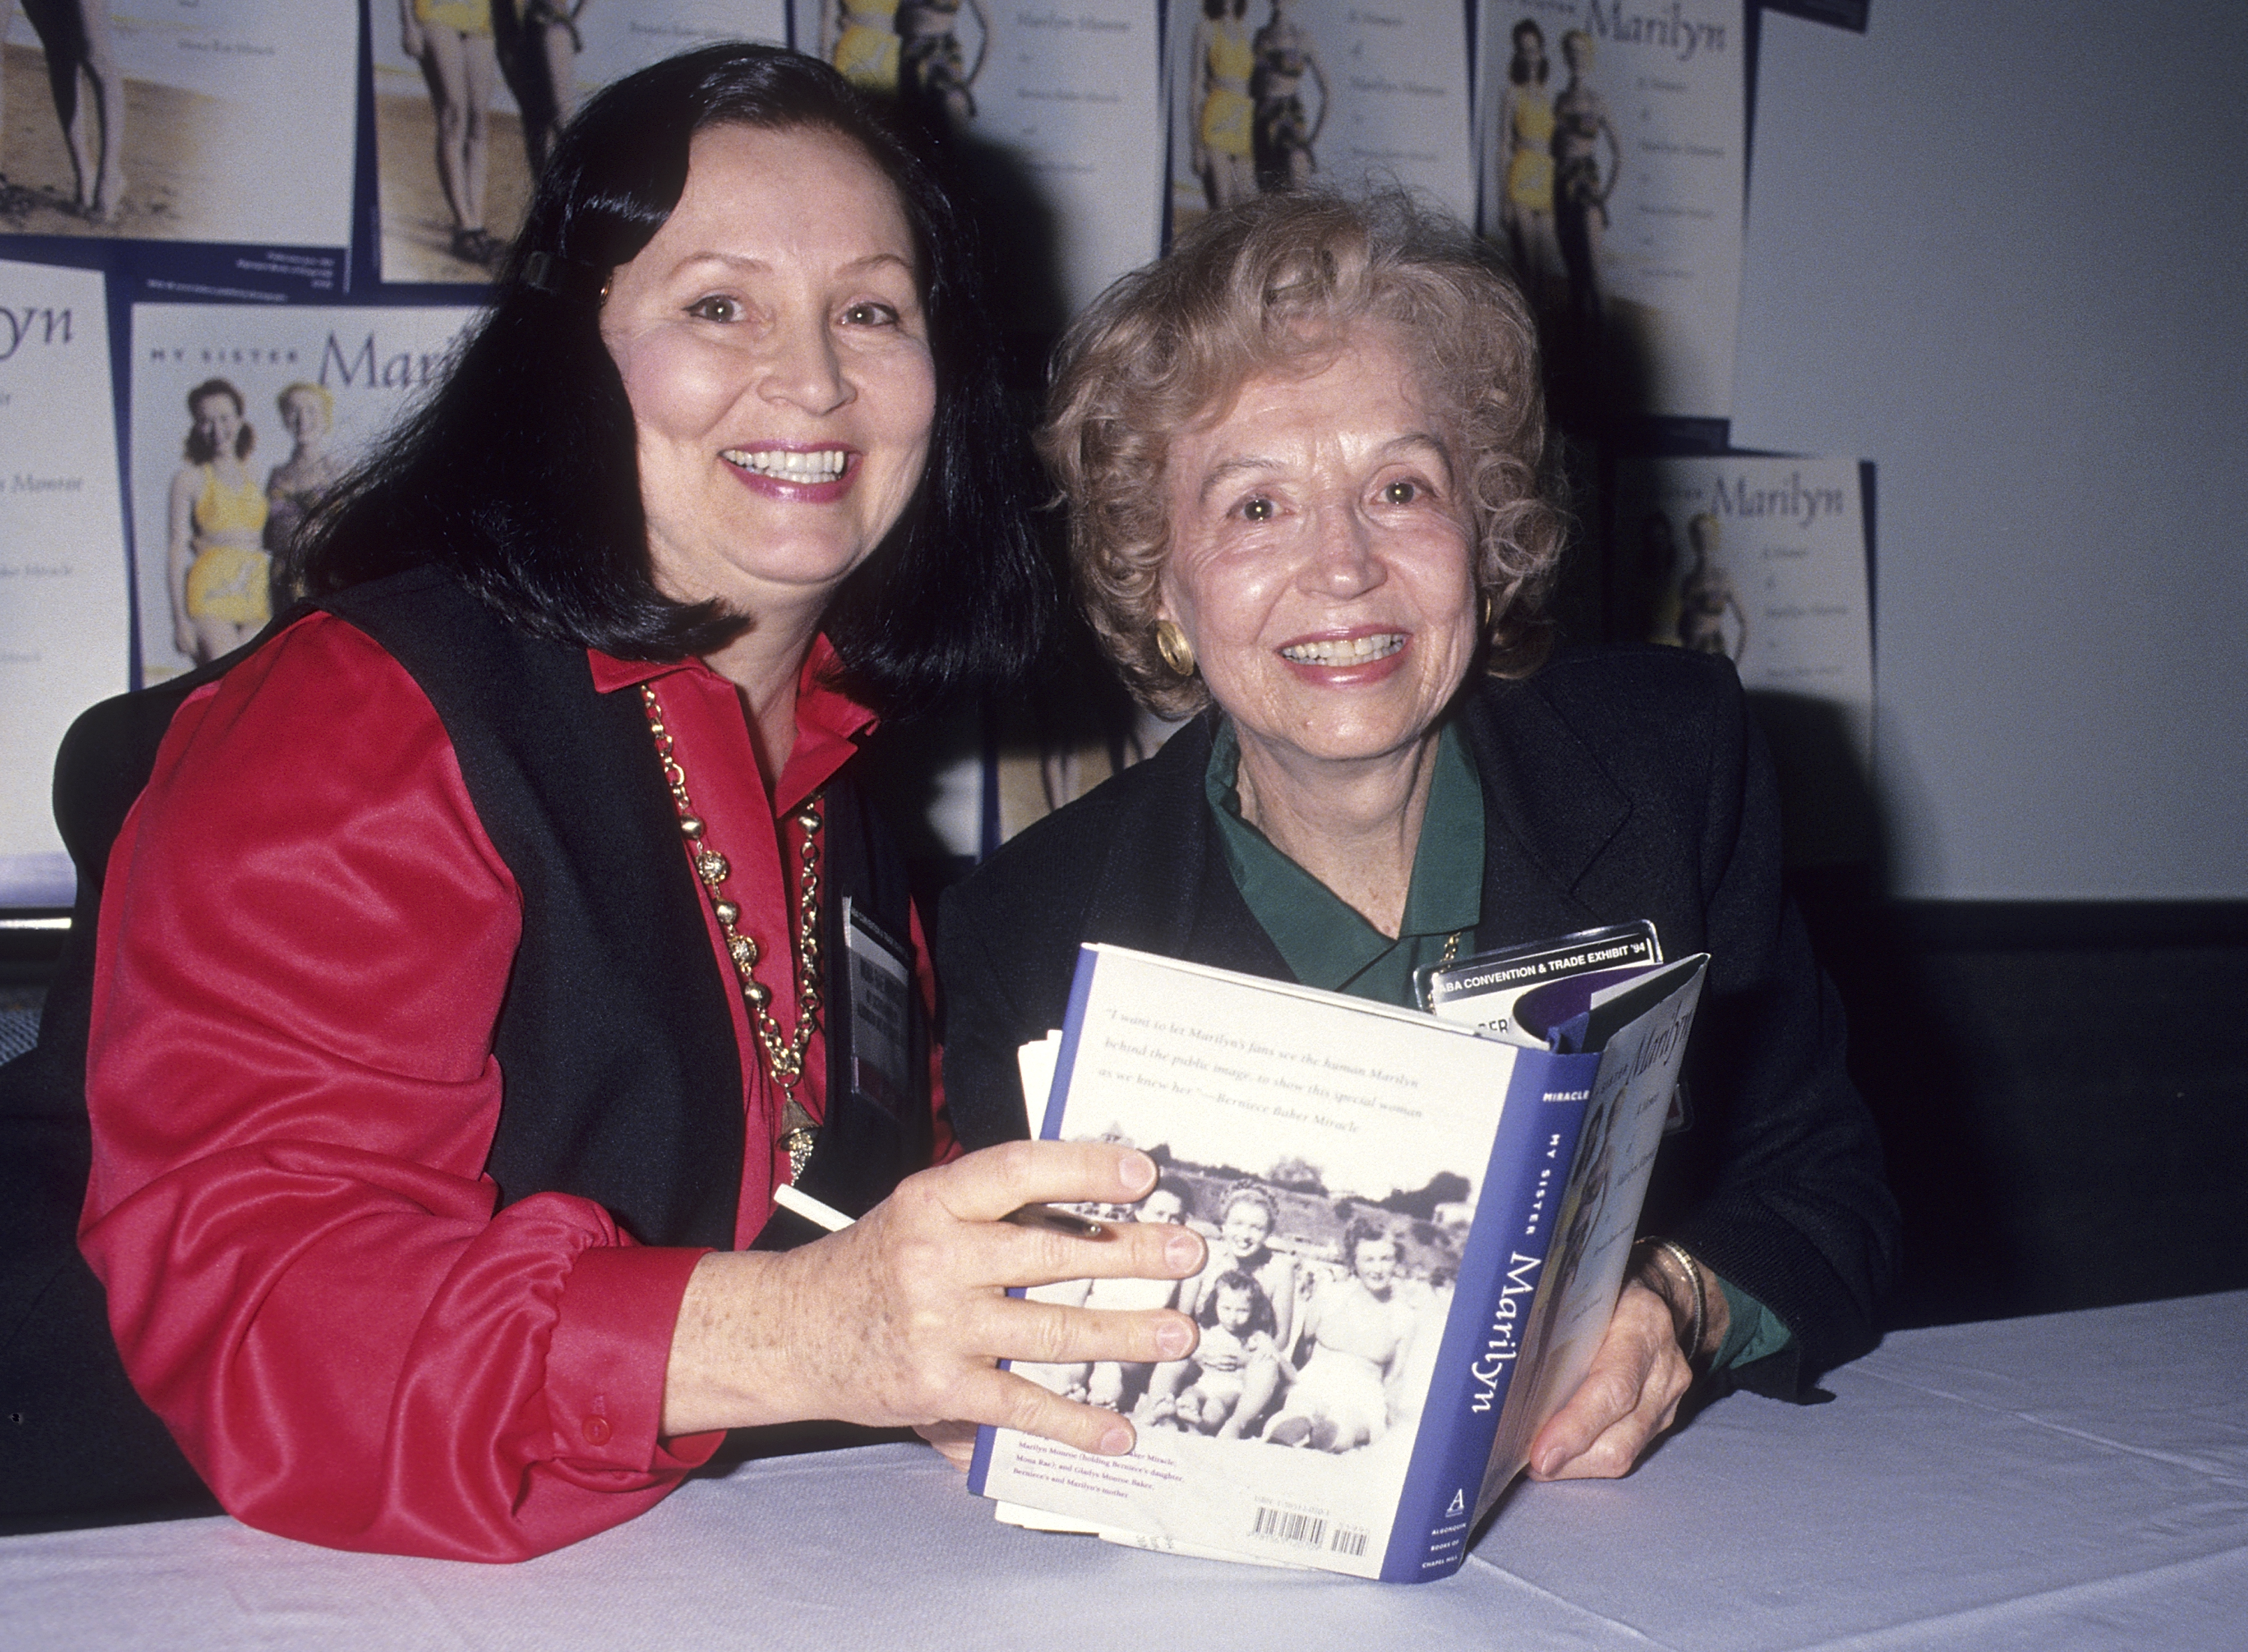 Berniece Baker Miracle and her daughter Mona Rae Miracke attend the 94th Annual American Booksellers Association Convention on May 28, 1994 in Los Angeles, California | Source: Getty Images